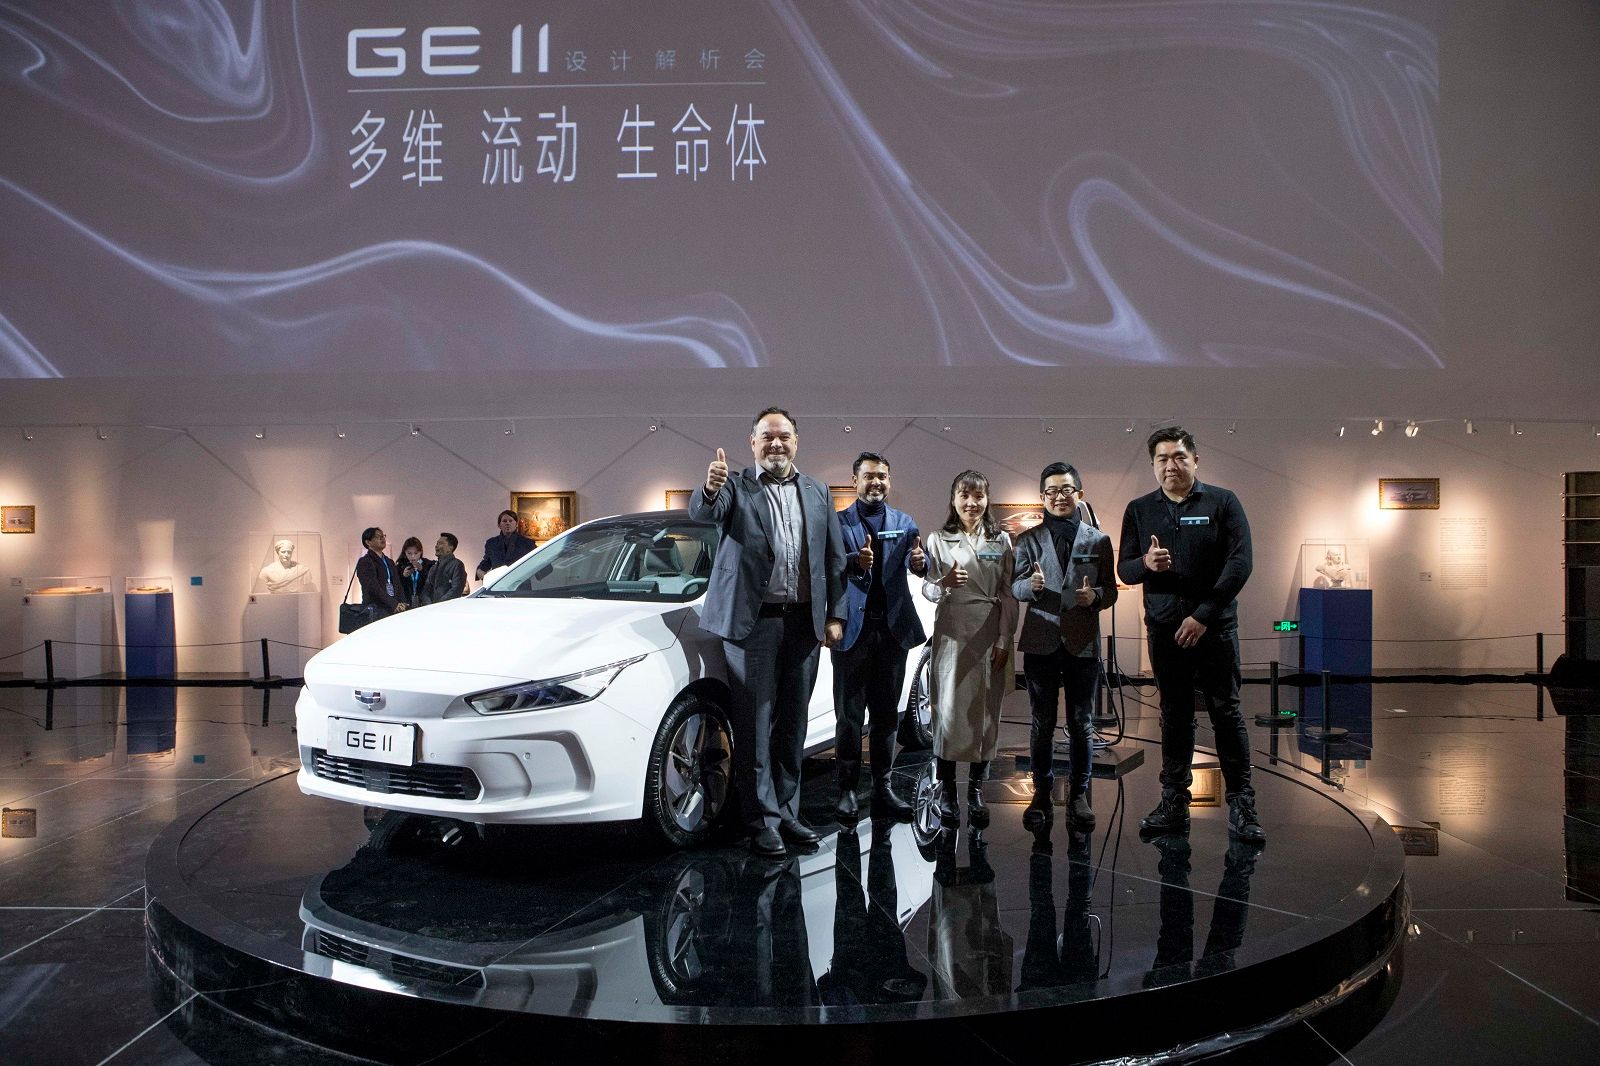 2019 Geely GE11